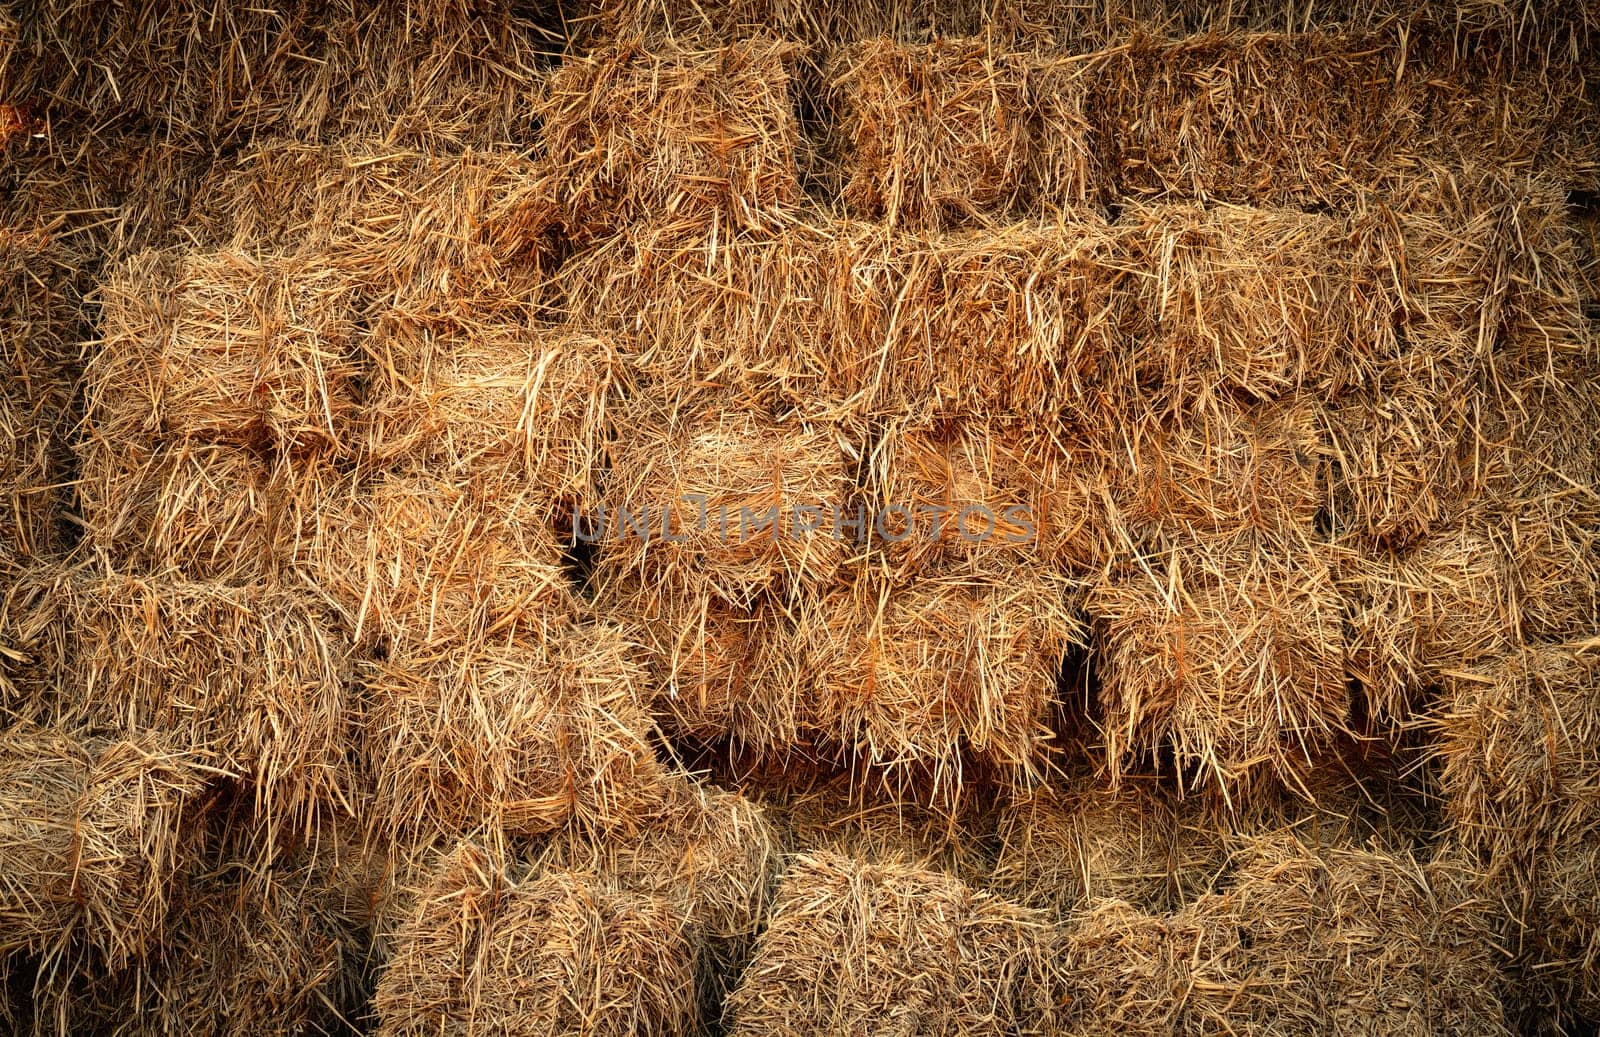 Dry straw bale and agricultural byproducts. stacked yellow straw bales for animal fodder and livestock bedding. Straw bales in sustainable farming. Agricultural byproducts. Agricultural practices. by Fahroni